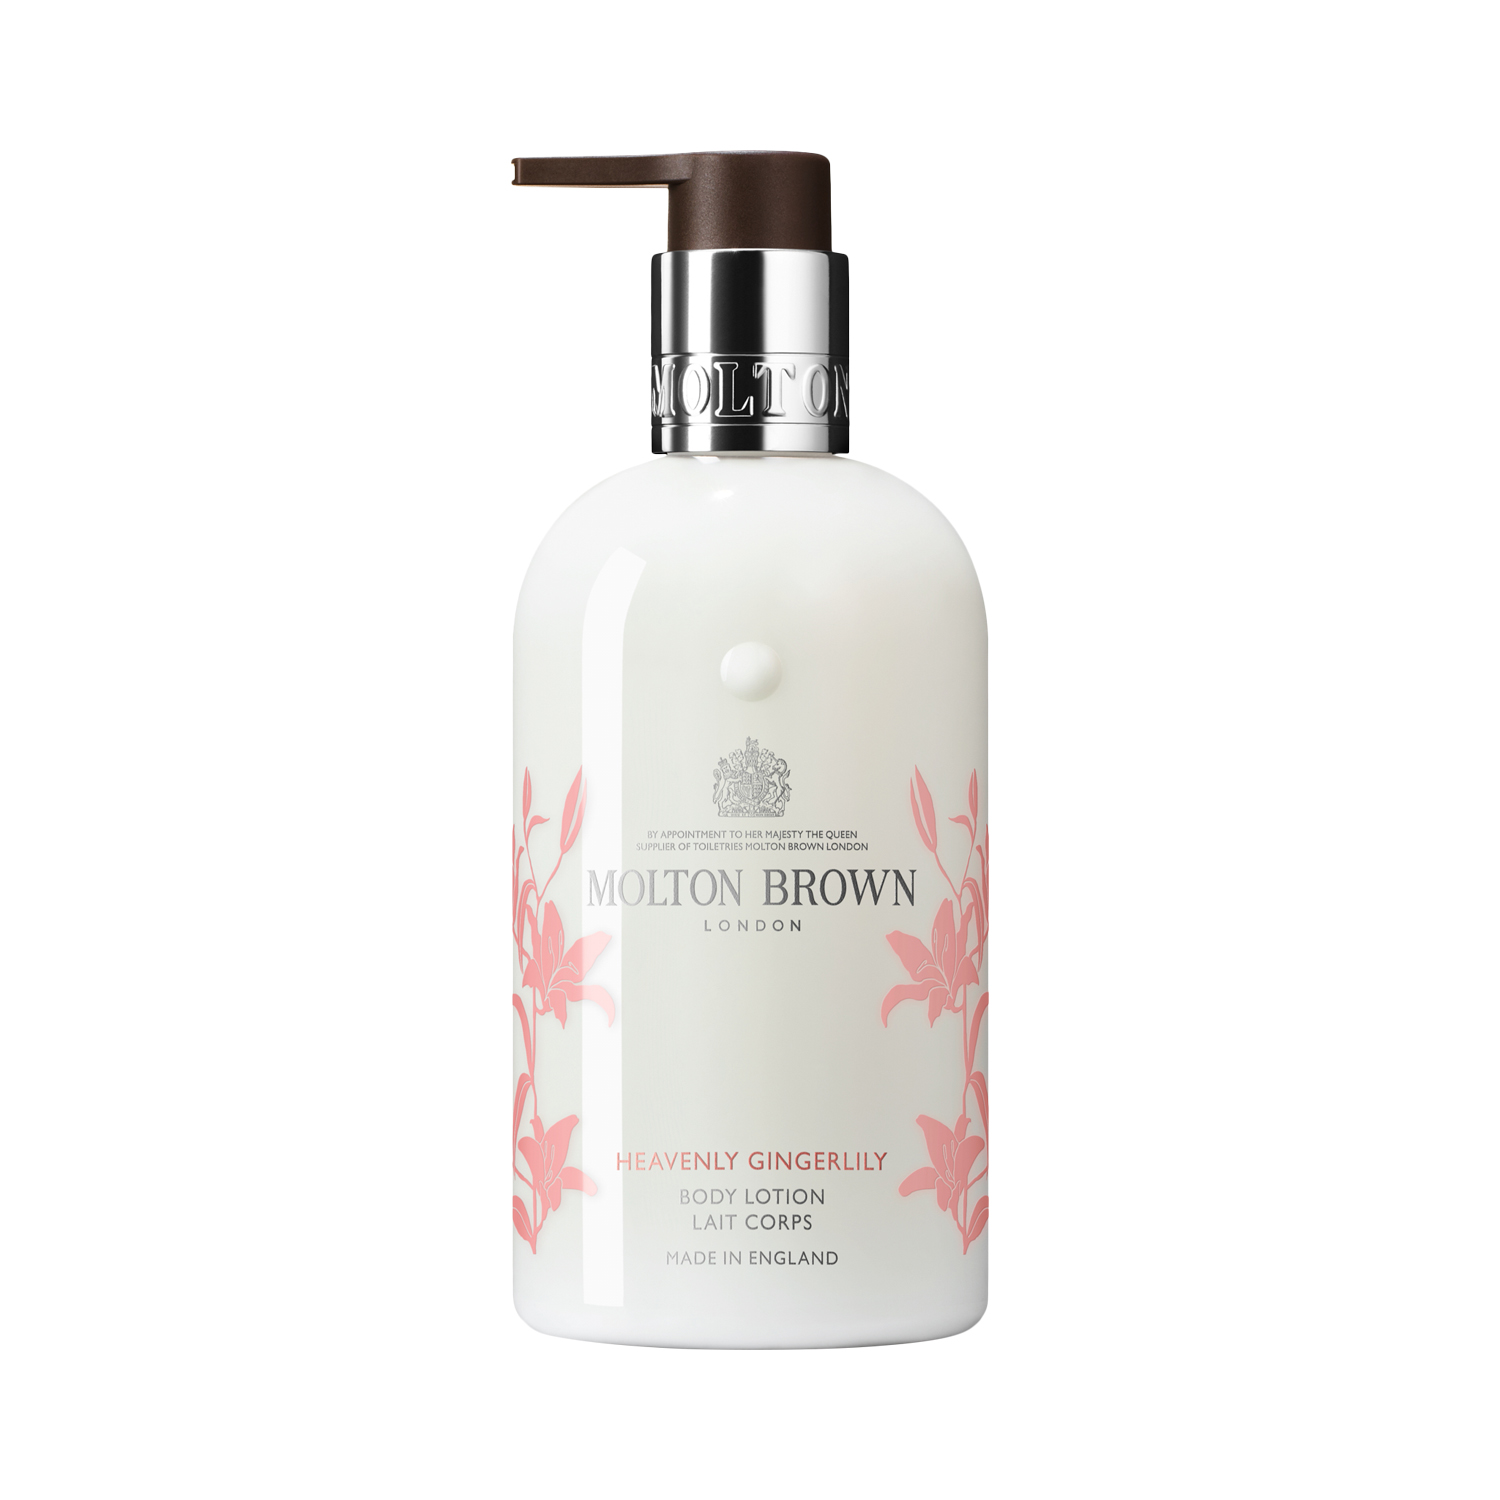 Molton Brown - Heavenly Gingerlily Body Lotion - Limited Edition